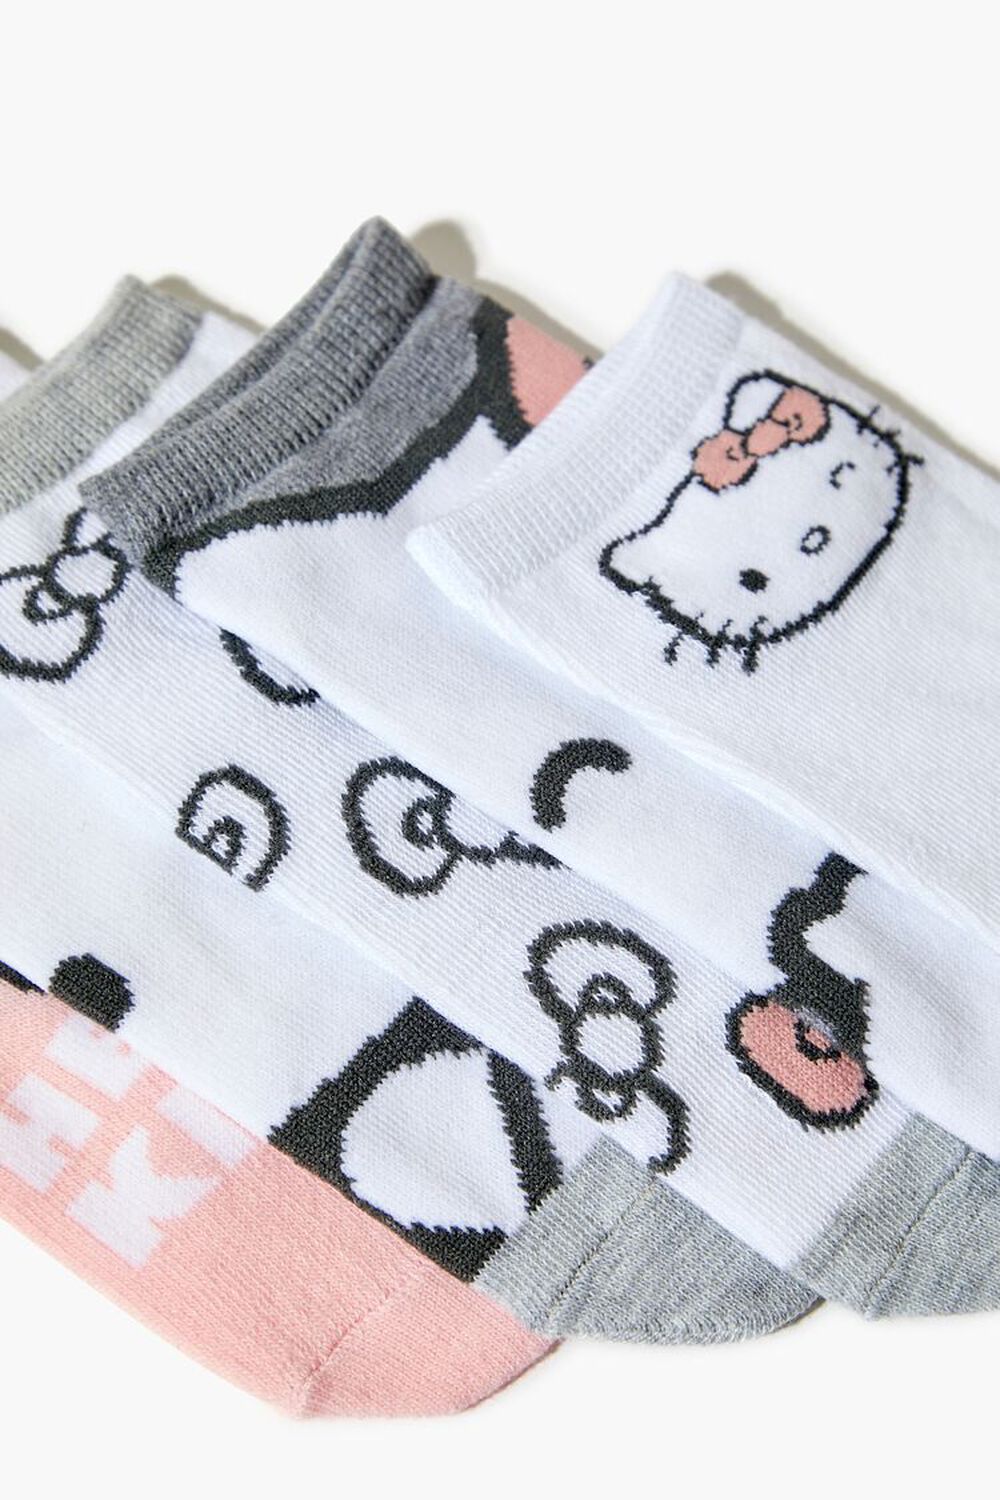 Hello Kitty Ankle Sock Set - 5 pack, image 3